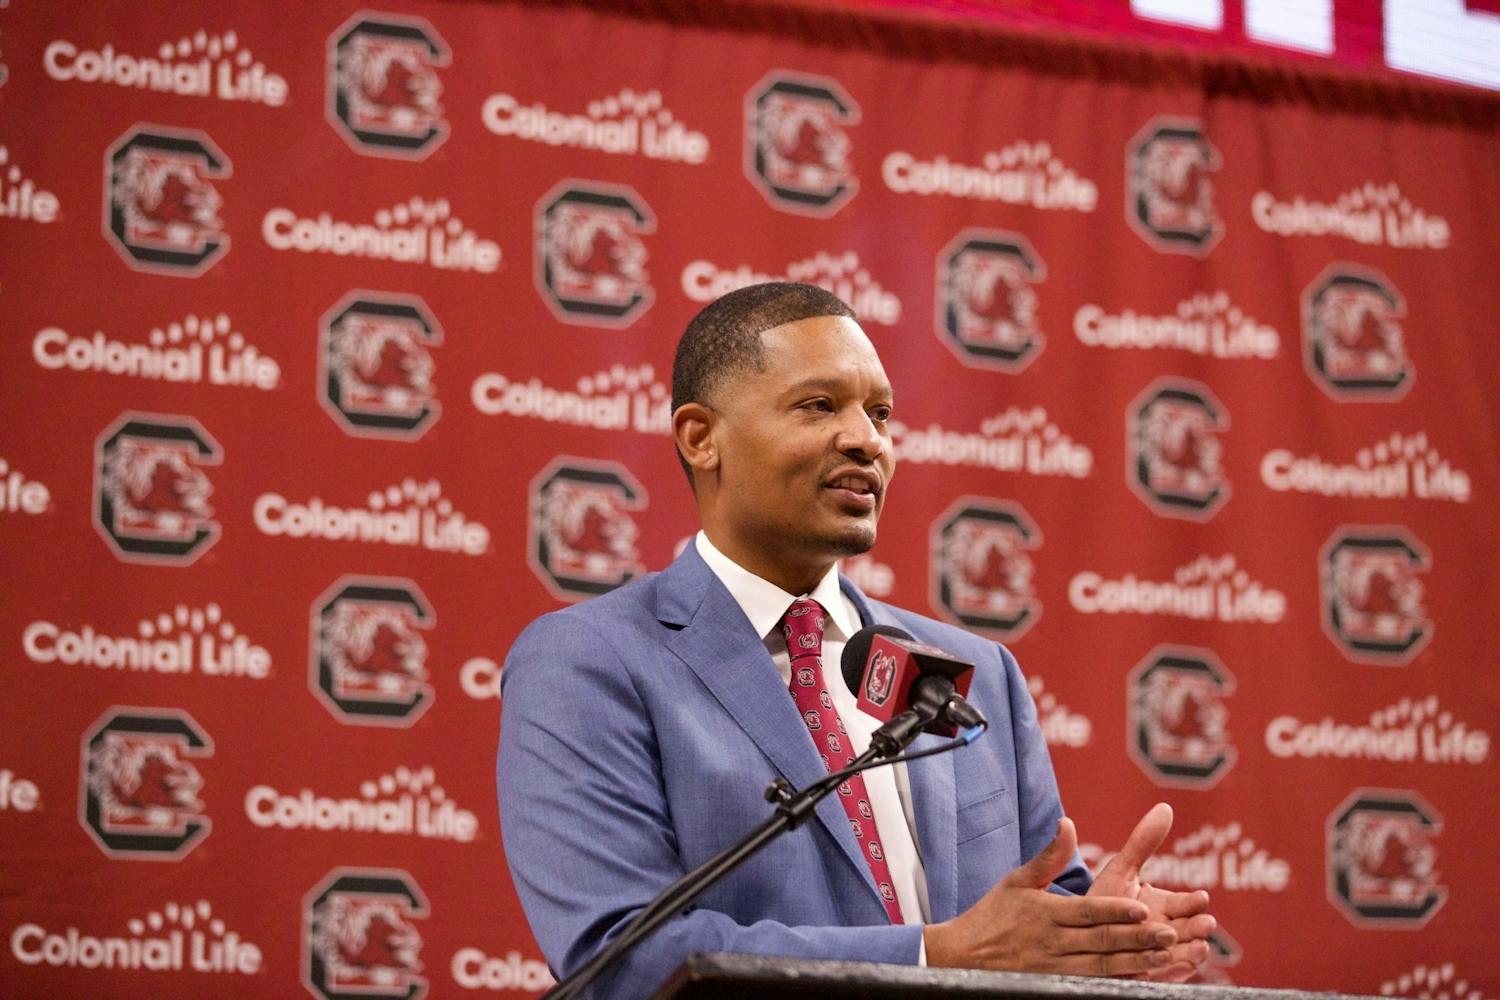 New men’s basketball coach Lamont Paris during his introductory press conference on March 24, 2022. The press conference was held on the floor of Colonial Life Arena.